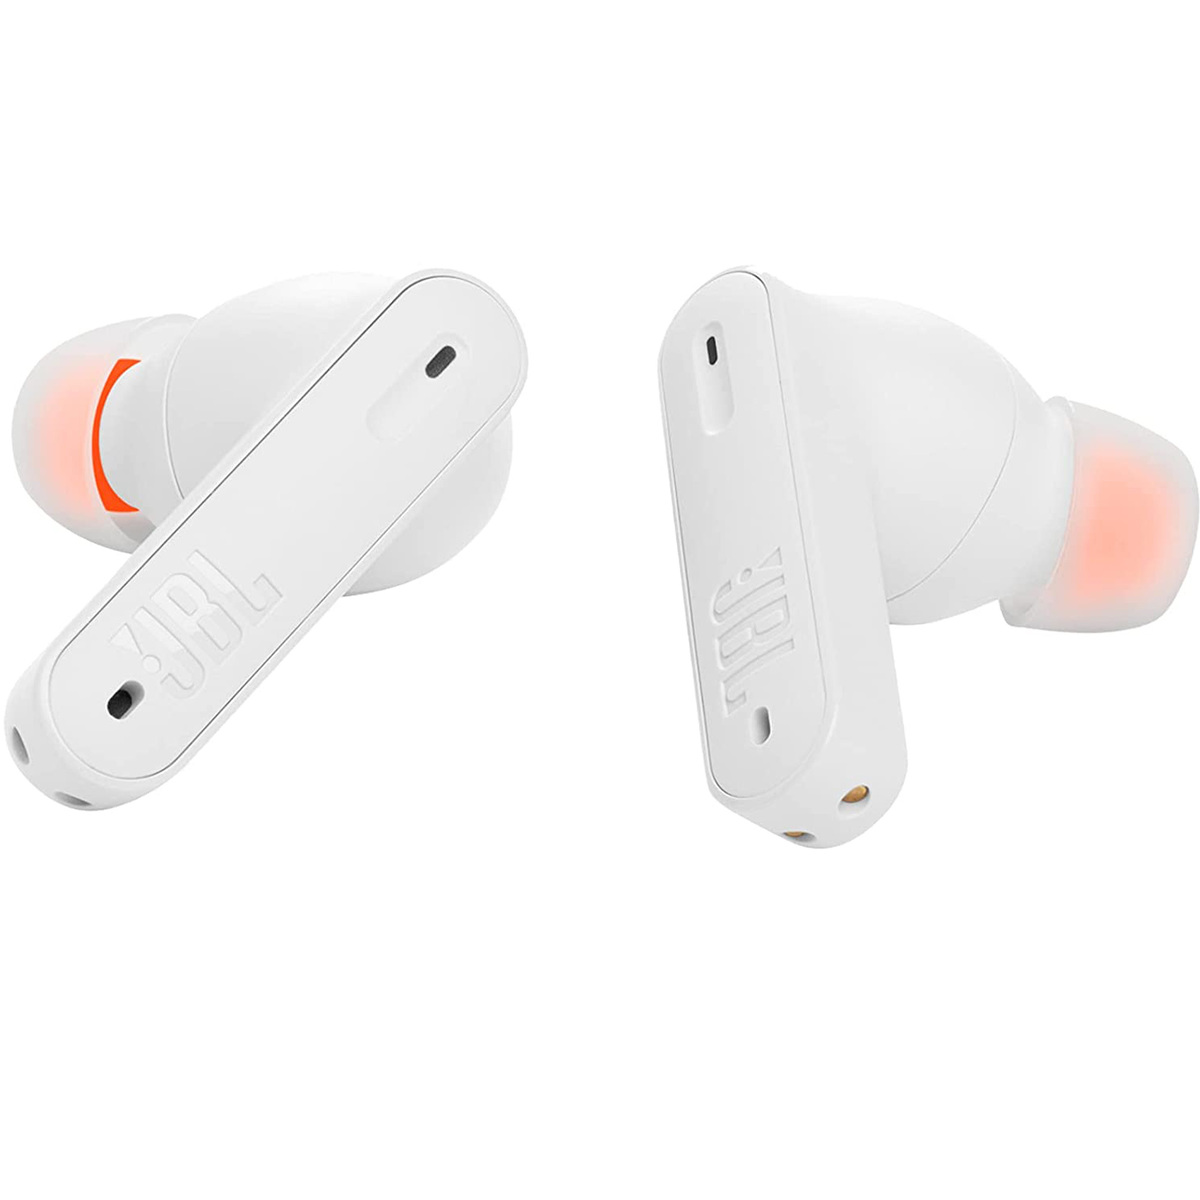 JBL True Wireless Noise Cancelling Earbud, 4 Mics, White,230NCTWS